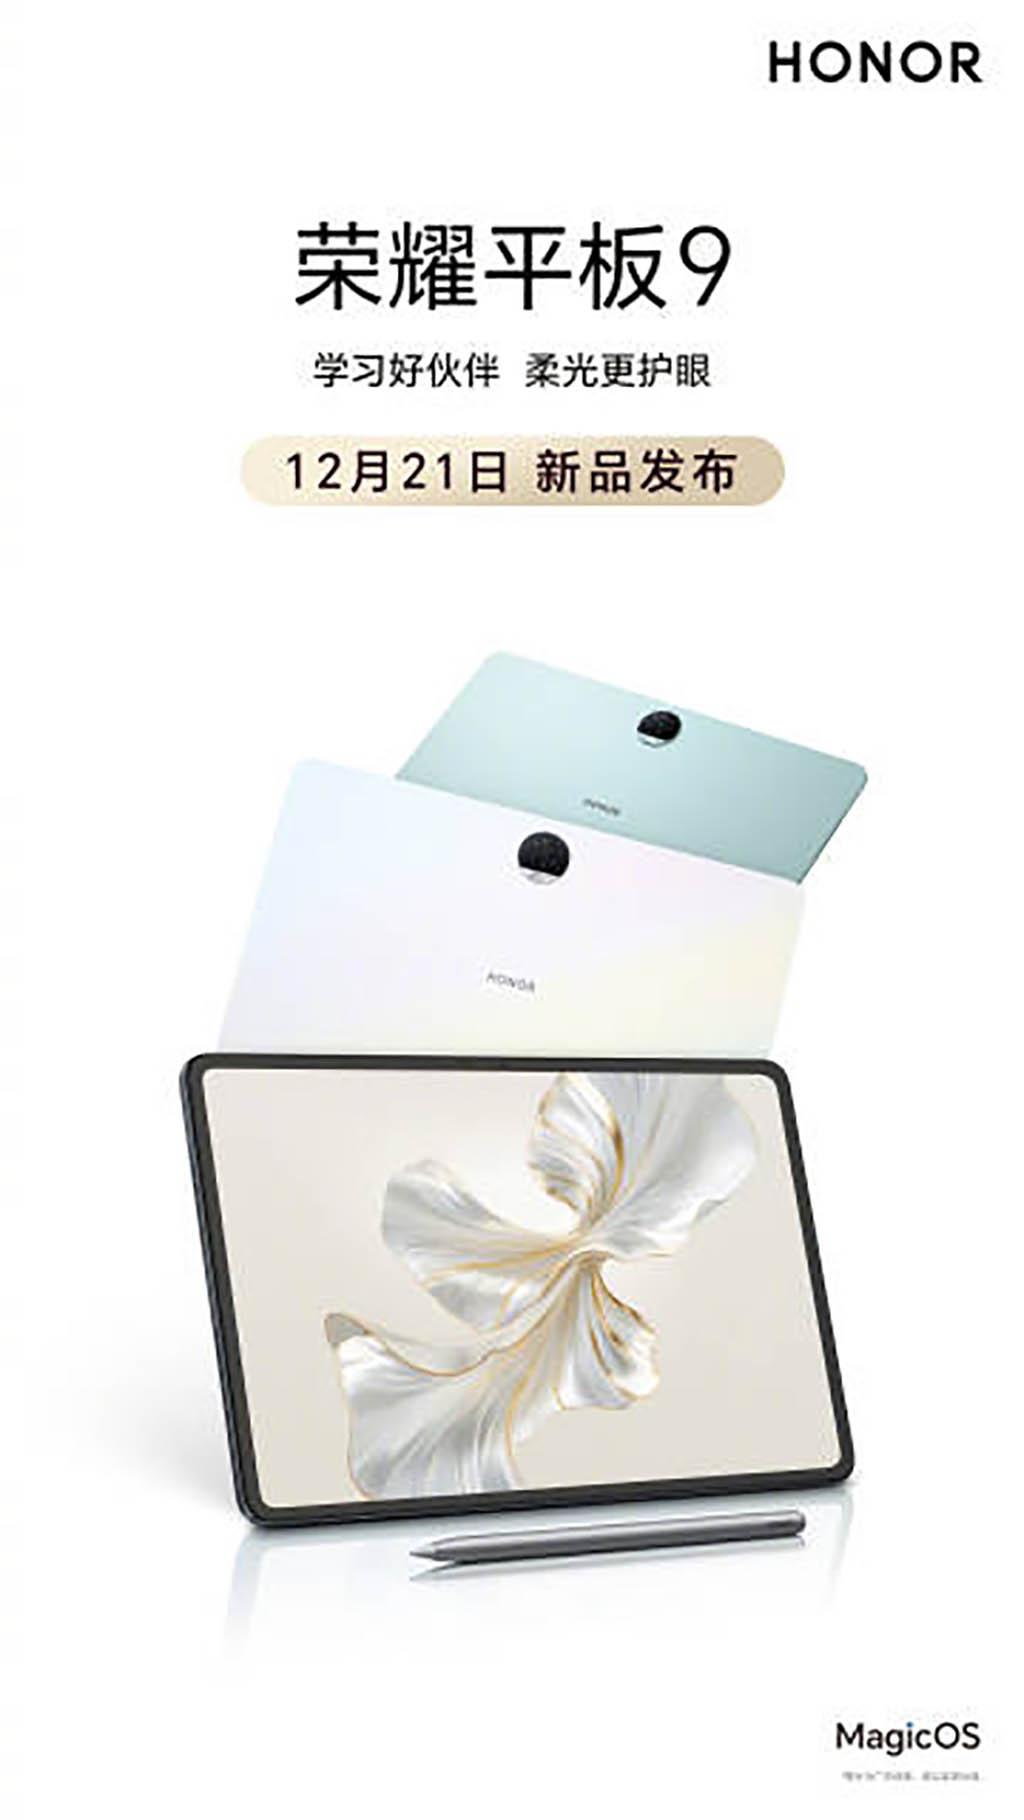 Honor Tablet 9 will launch December 21